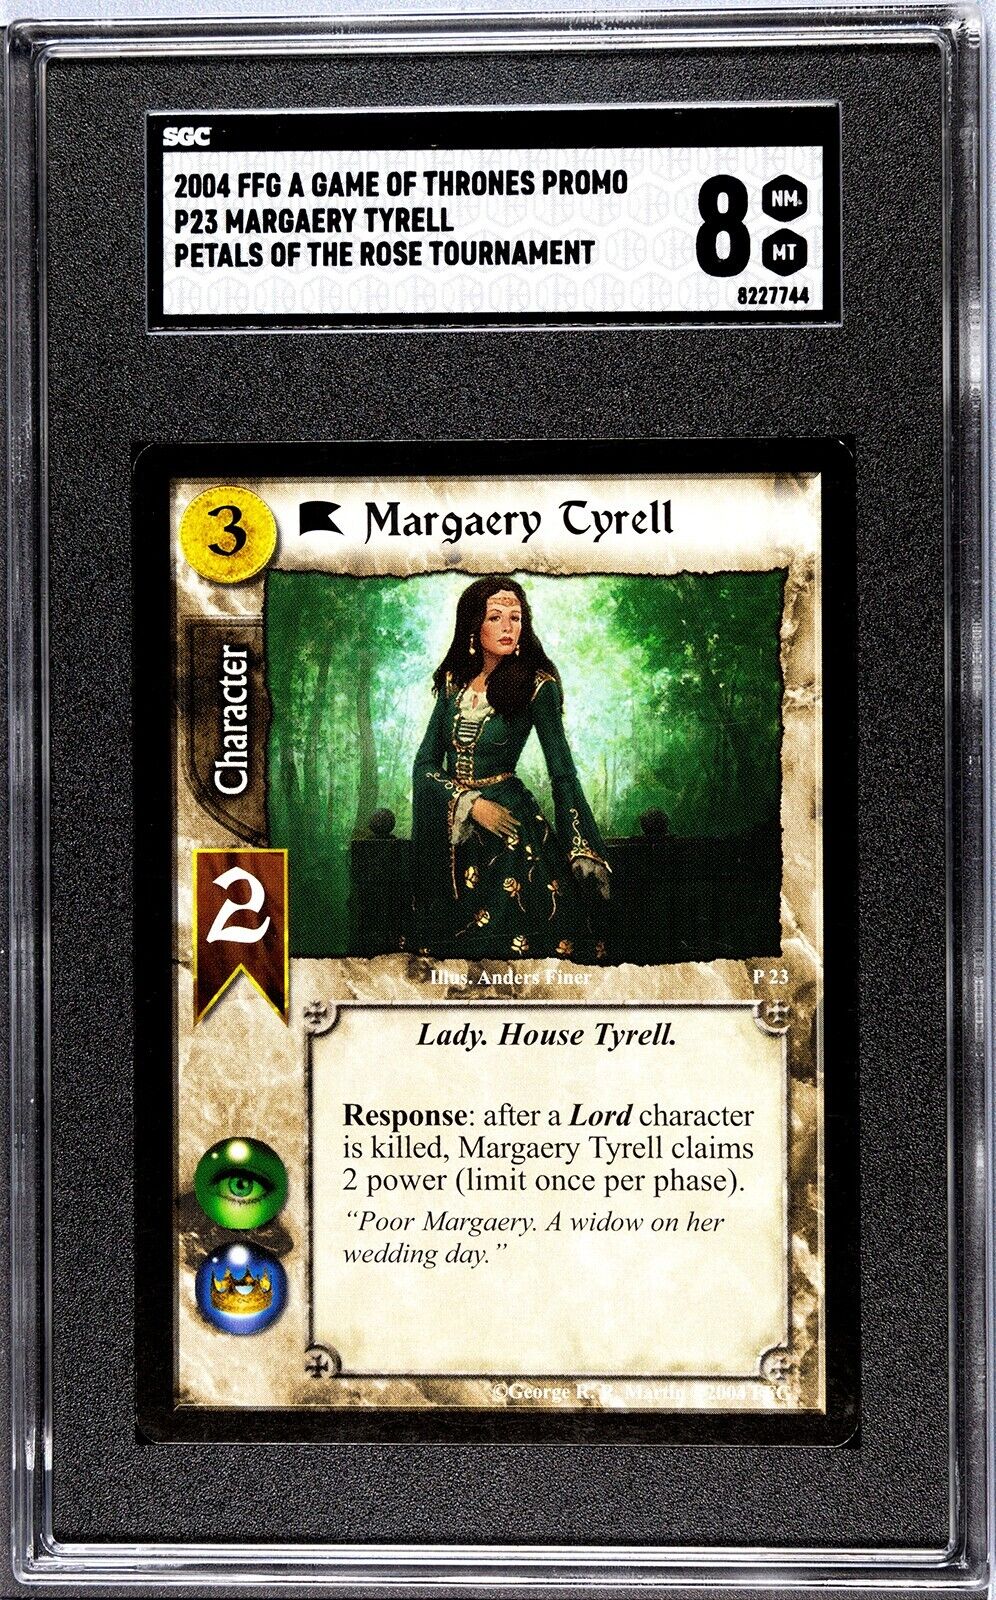 2003 Game of Thrones CCG Petals of the Rose Promo P23 Margaery Tyrell SGC 8